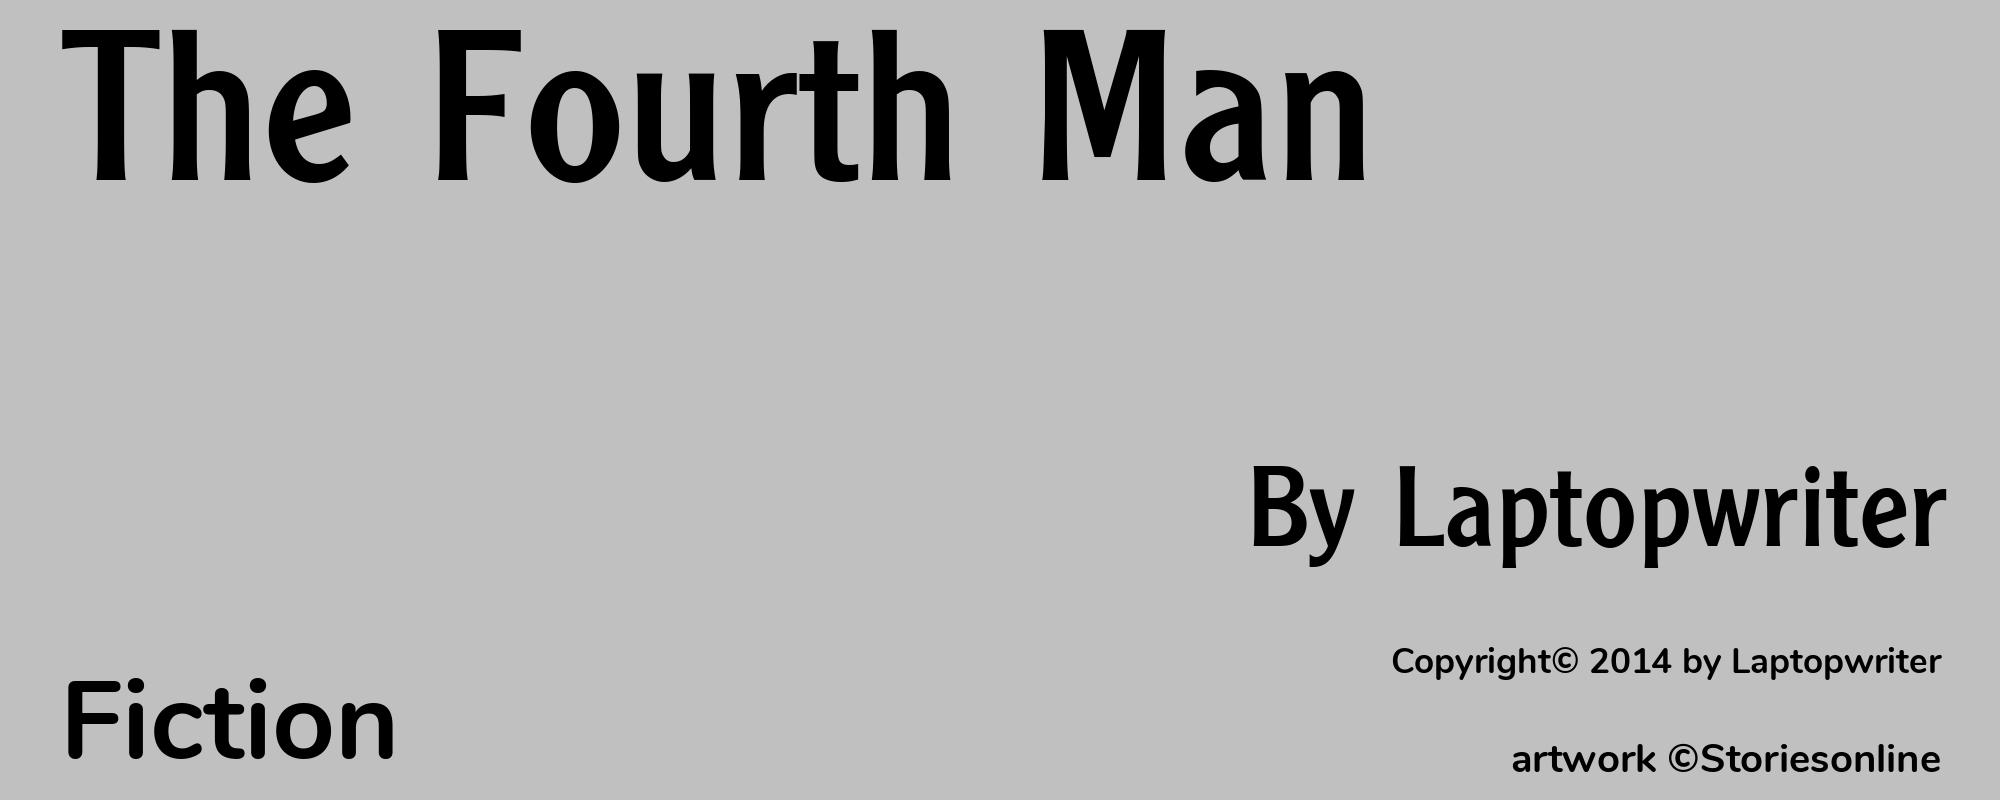 The Fourth Man - Cover